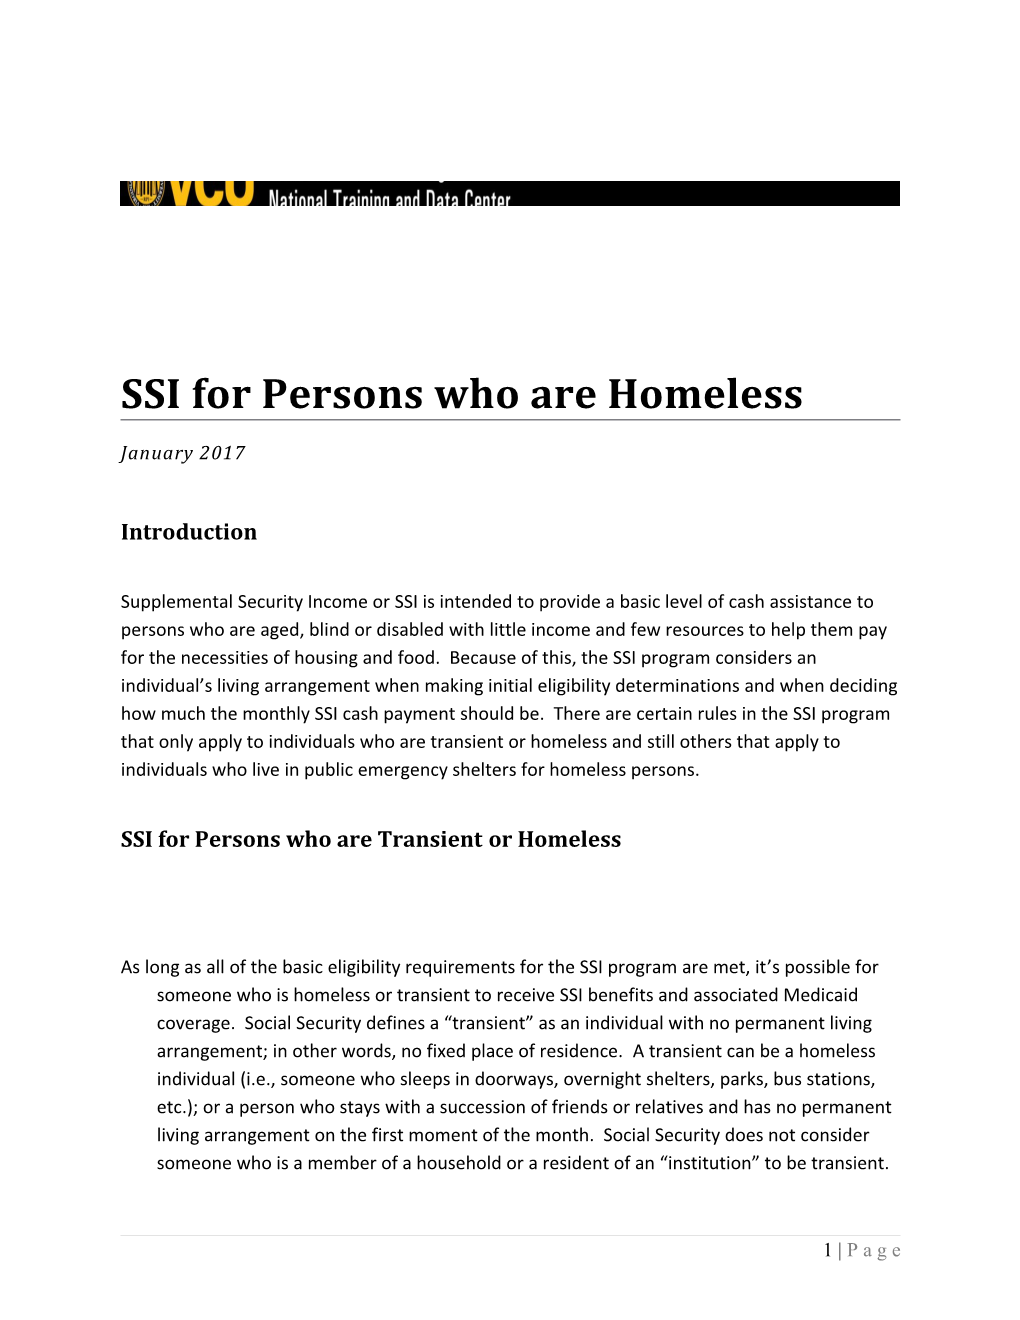 SSI for Persons Who Are Transient Or Homeless